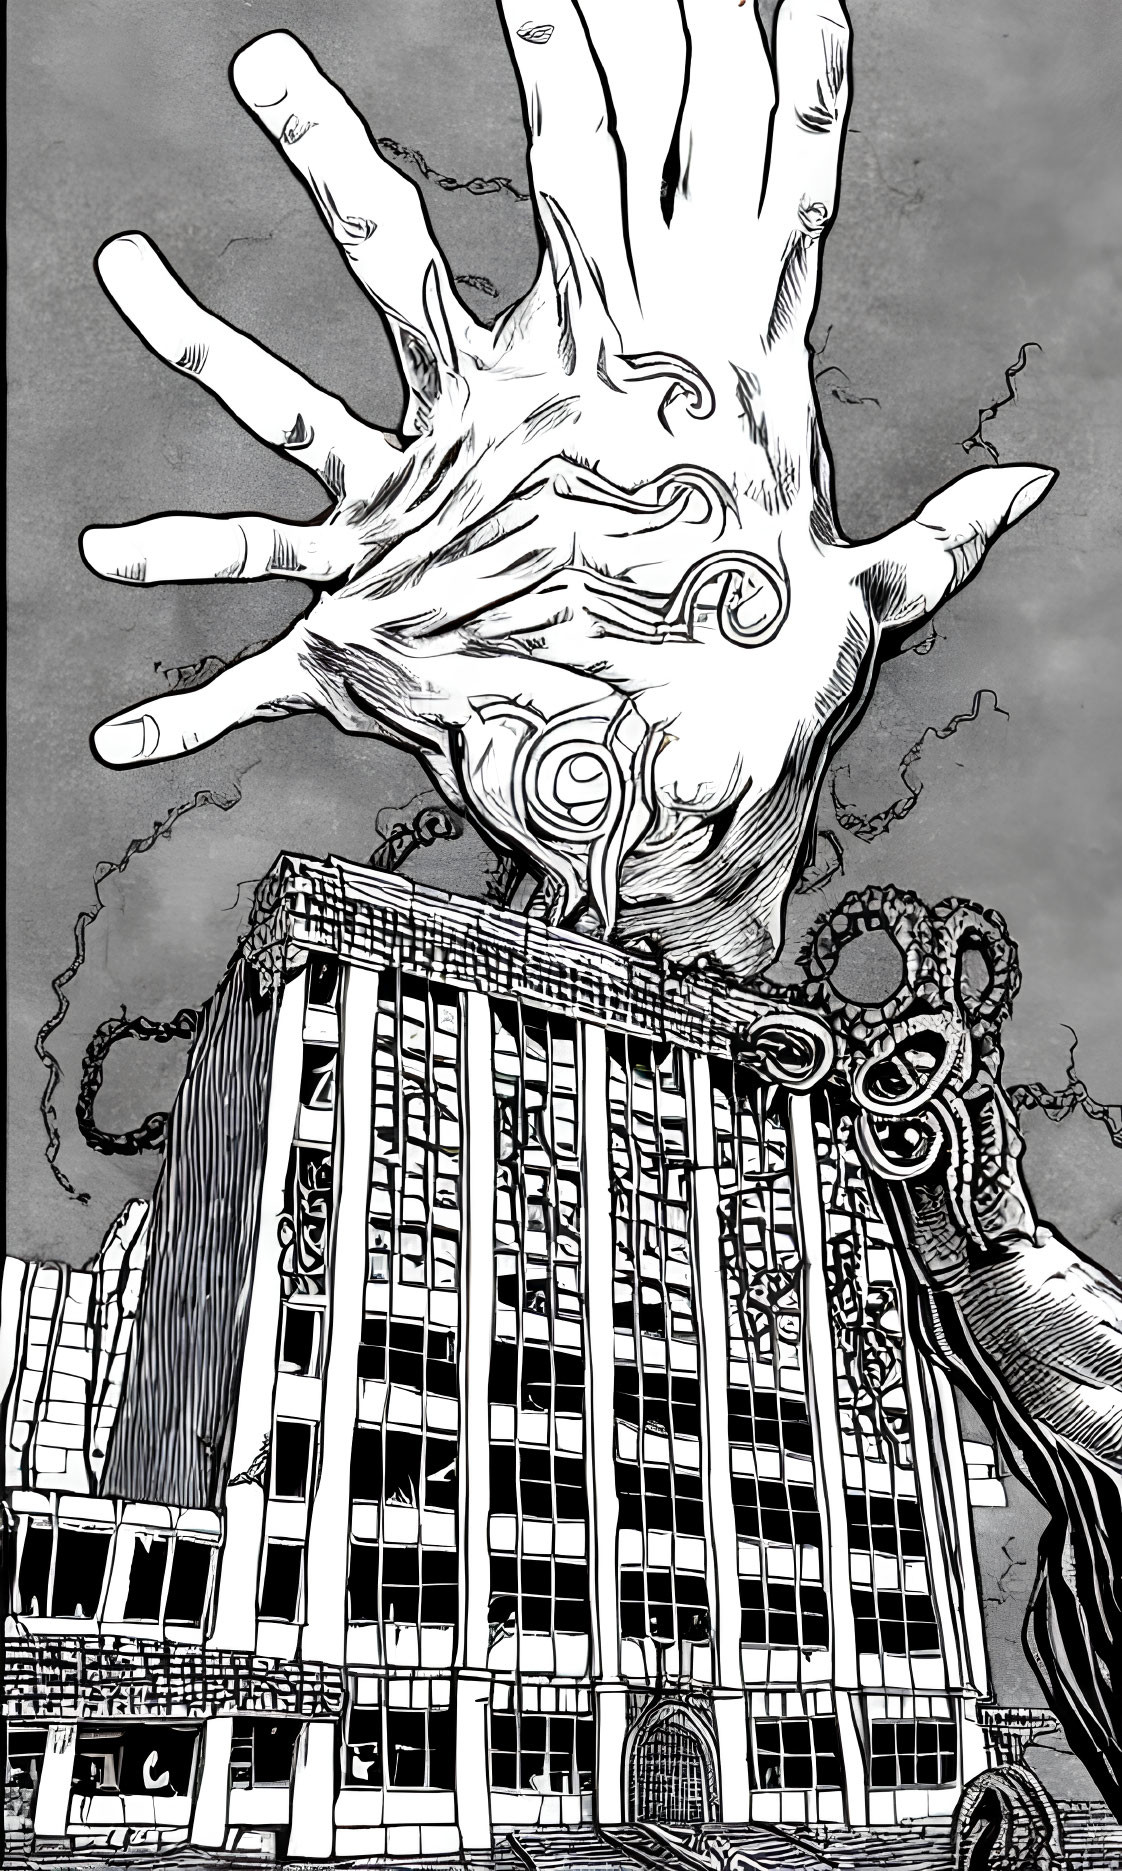 Monochrome illustration of giant hand holding skyscraper with chained smaller hands